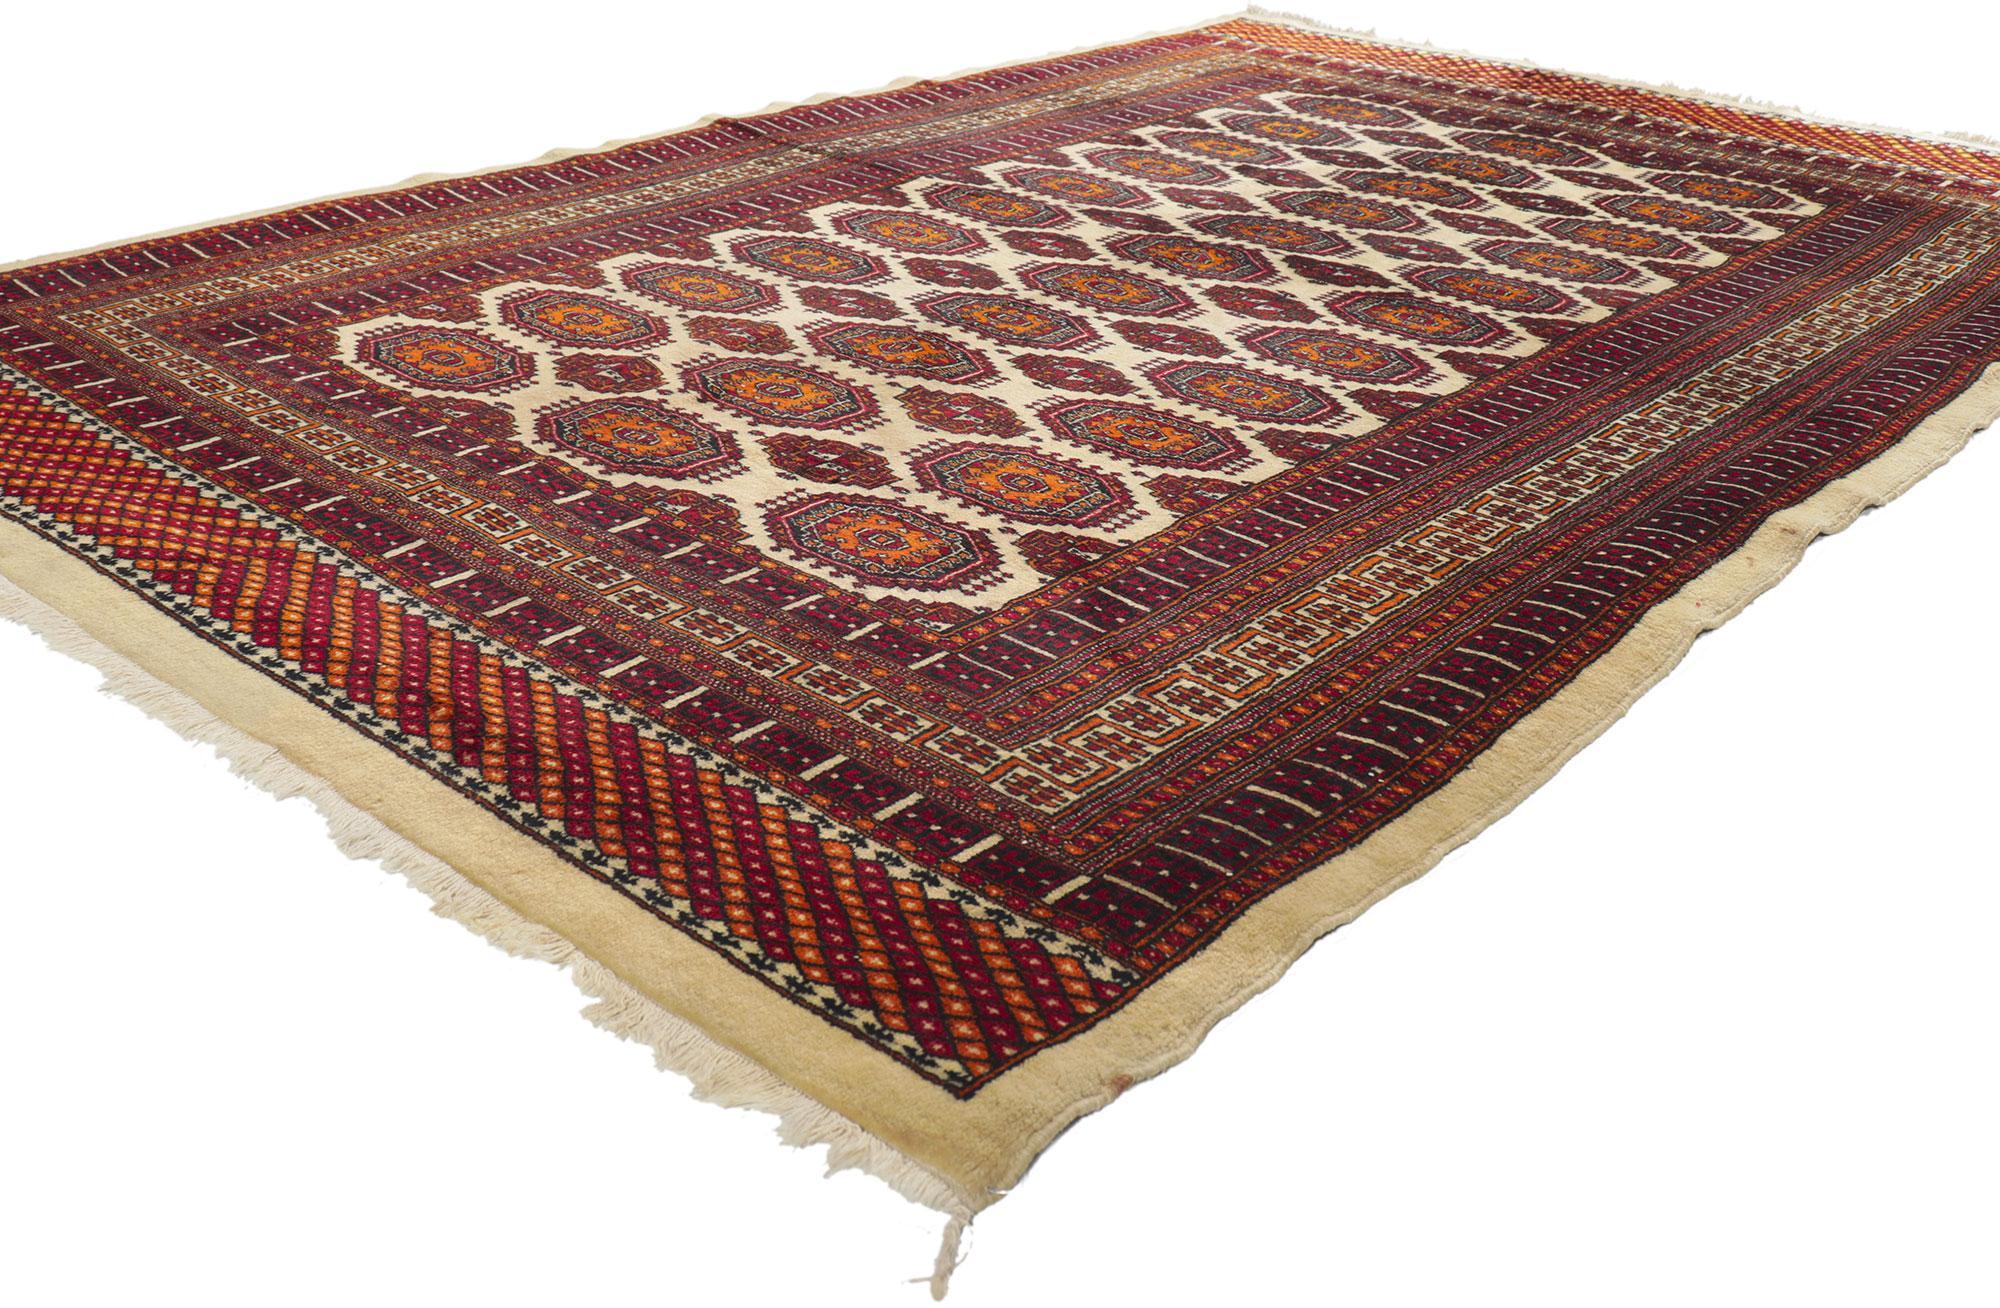 74502 Vintage Pakistani Bokhara Rug, 05'00 x 08'00. Emanating nomadic style with incredible detail and texture, this hand knotted vintage Pakistani Bokhara rug is a captivating vision of woven beauty. The eye-catching geometric design and earthy